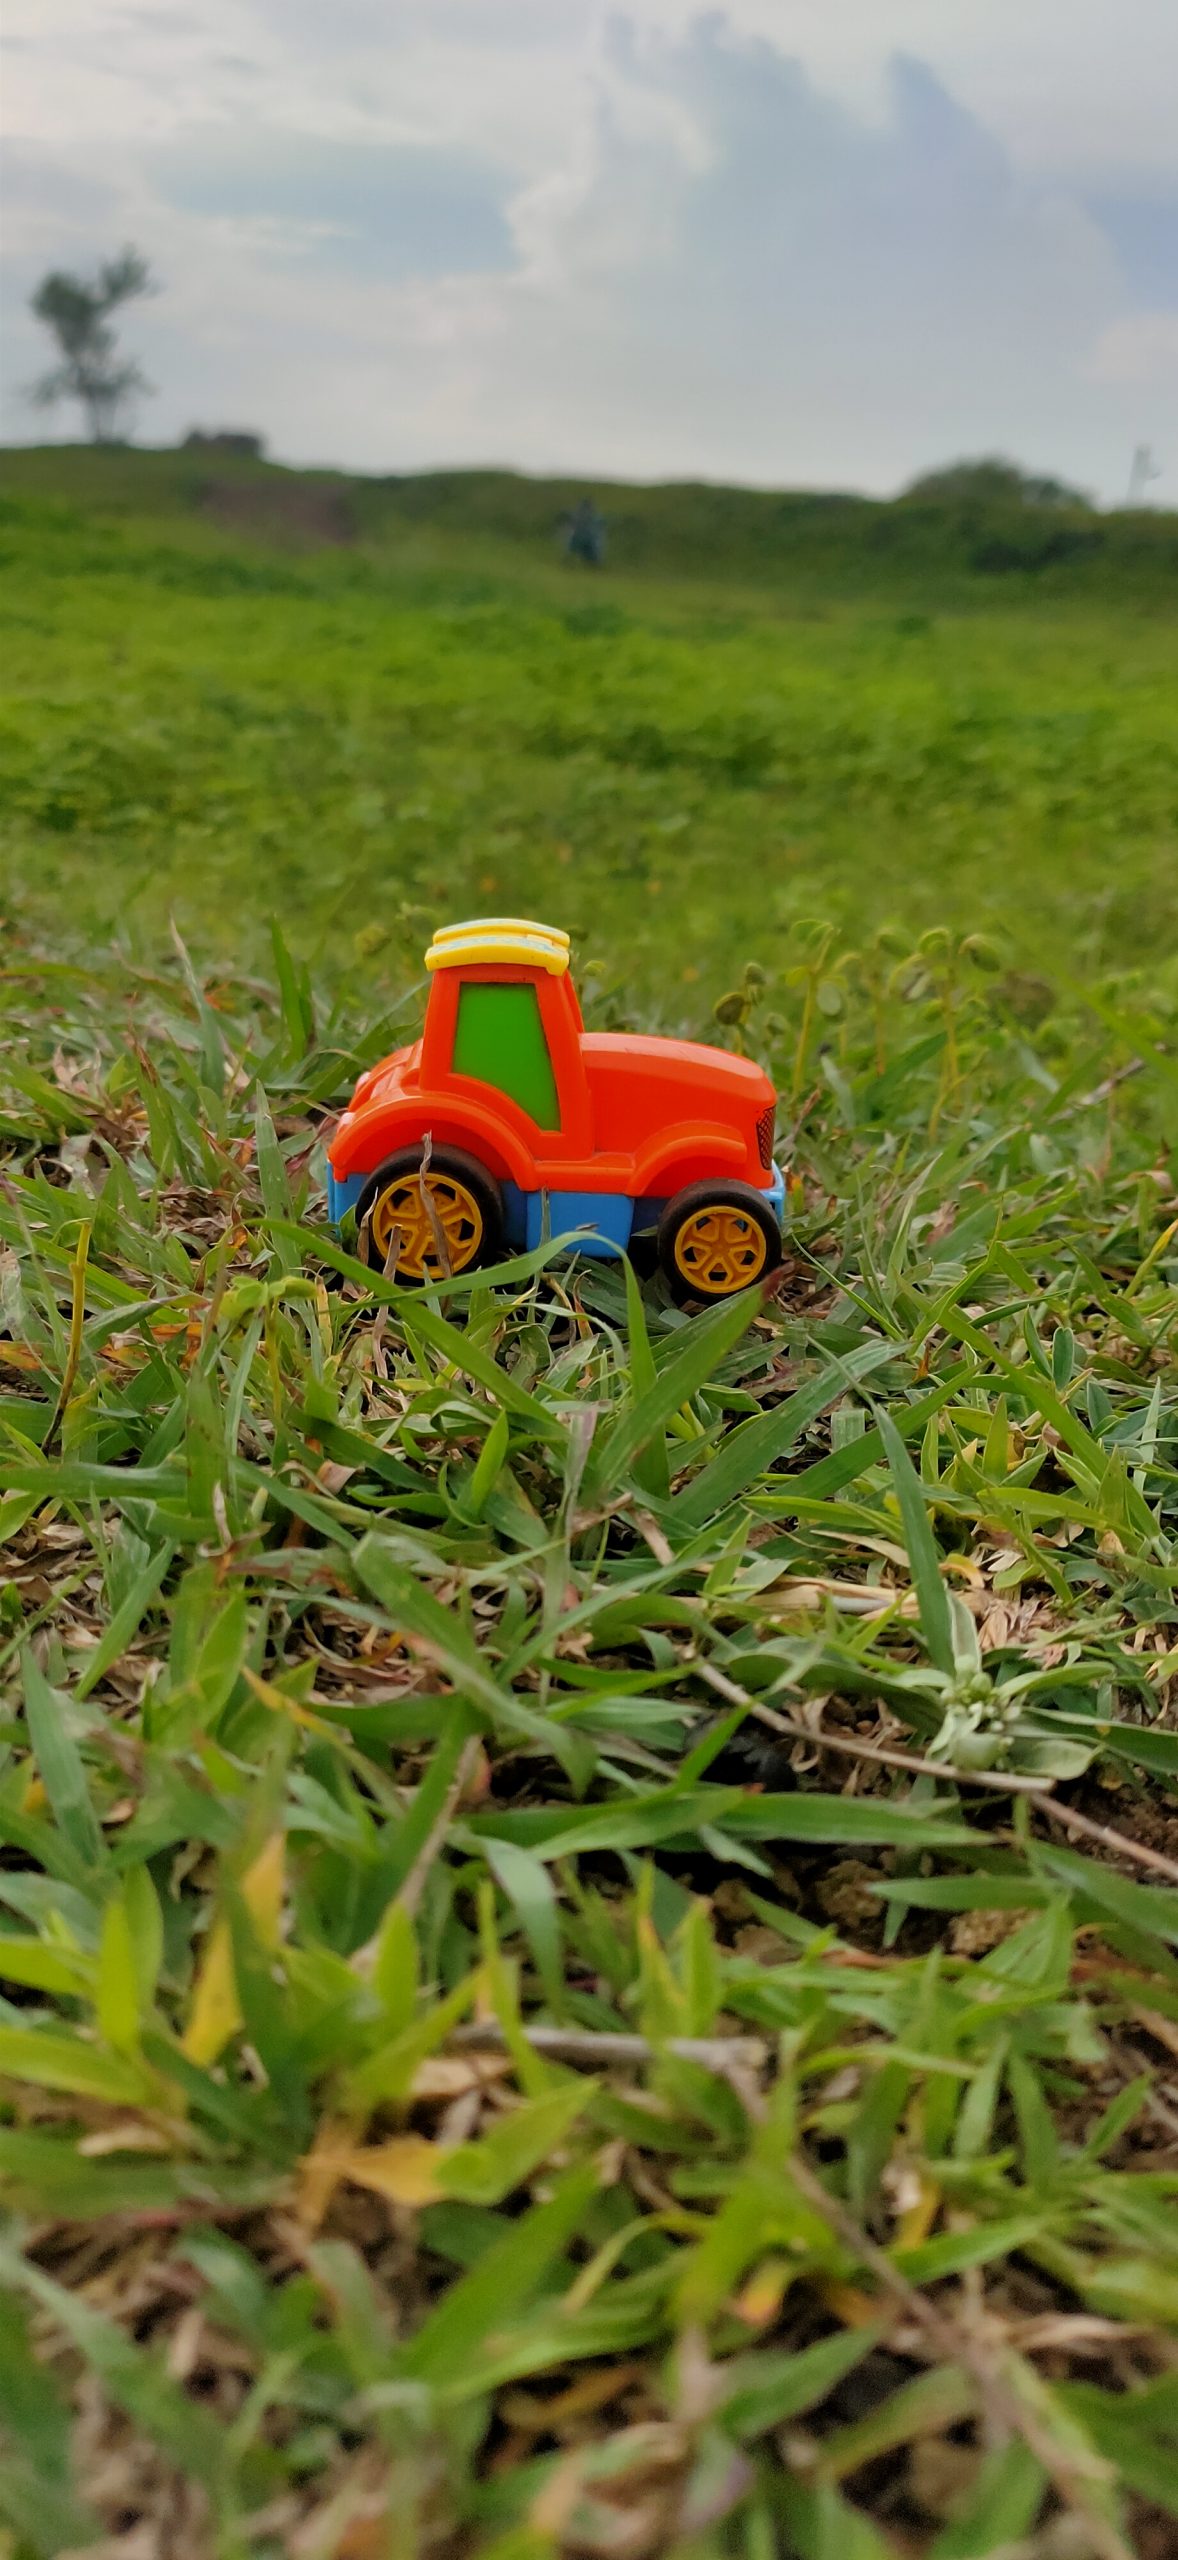 Toy Car in the grass